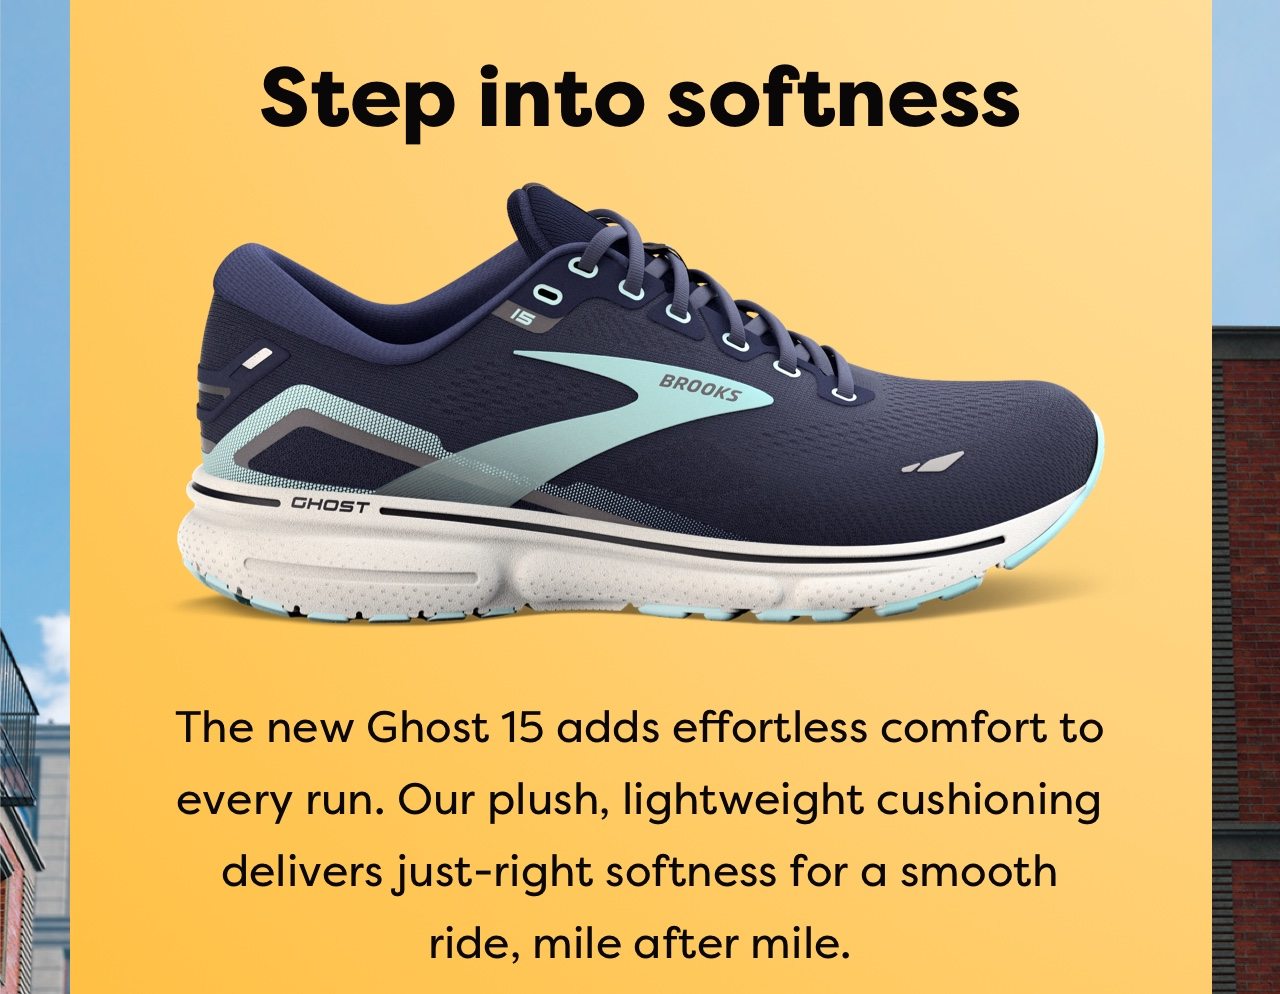 Step into softness | The new Ghost 15 adds effortless comfort to every run. Our plush, lightweight cushioning delivers just-right softness for a smooth ride, mile after mile.